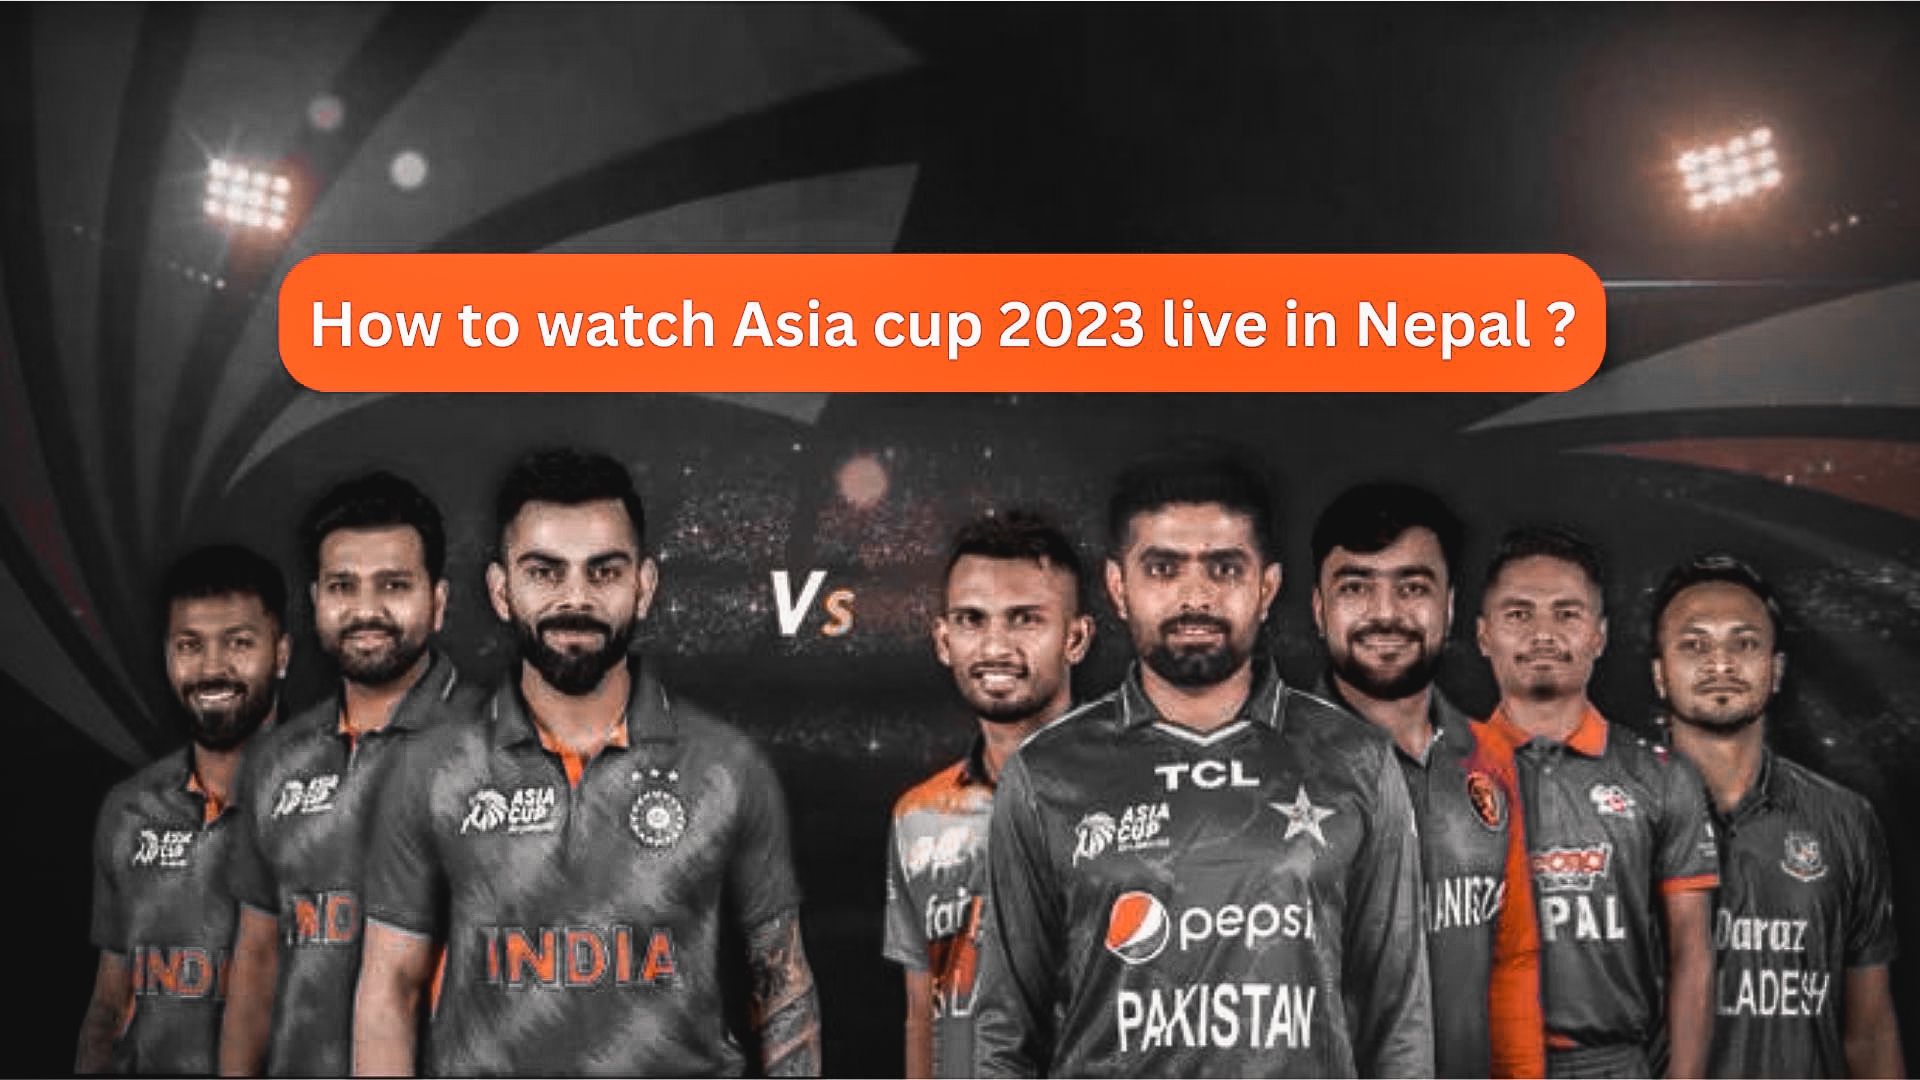 How to watch Asia cup live in Nepal [2023]